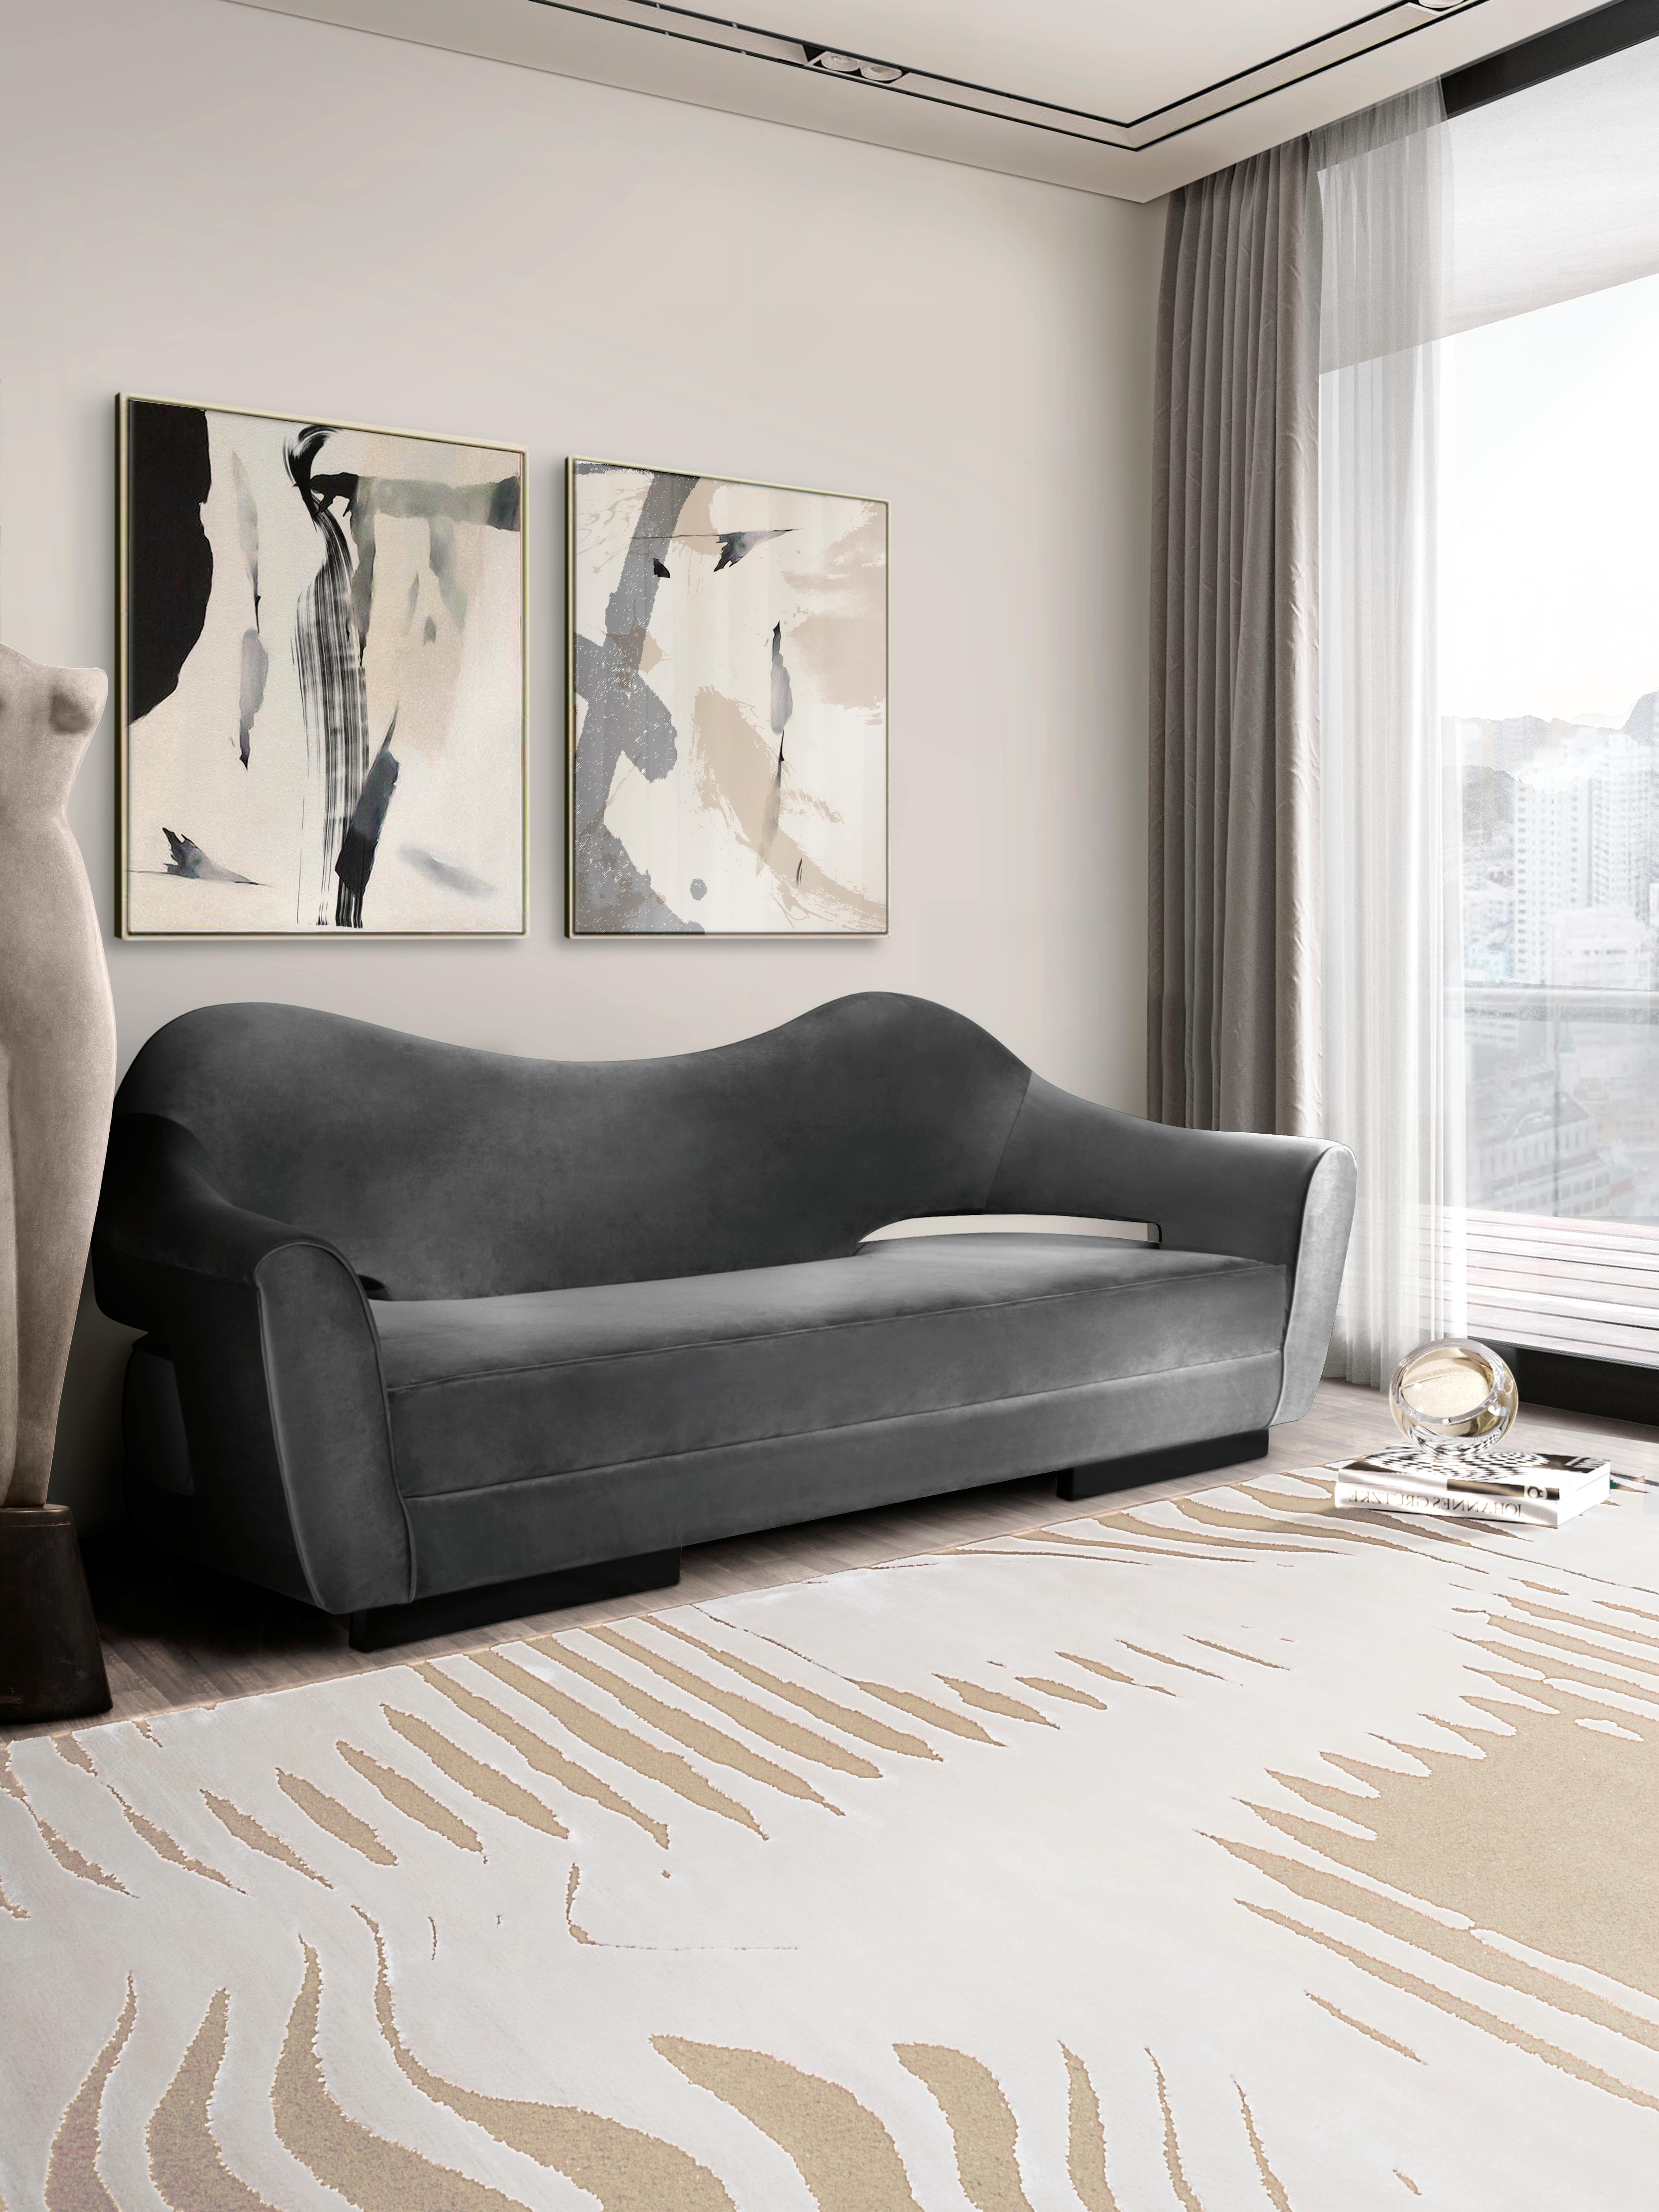 Modern Living Room With Grey Velvet Couch - Home'Society